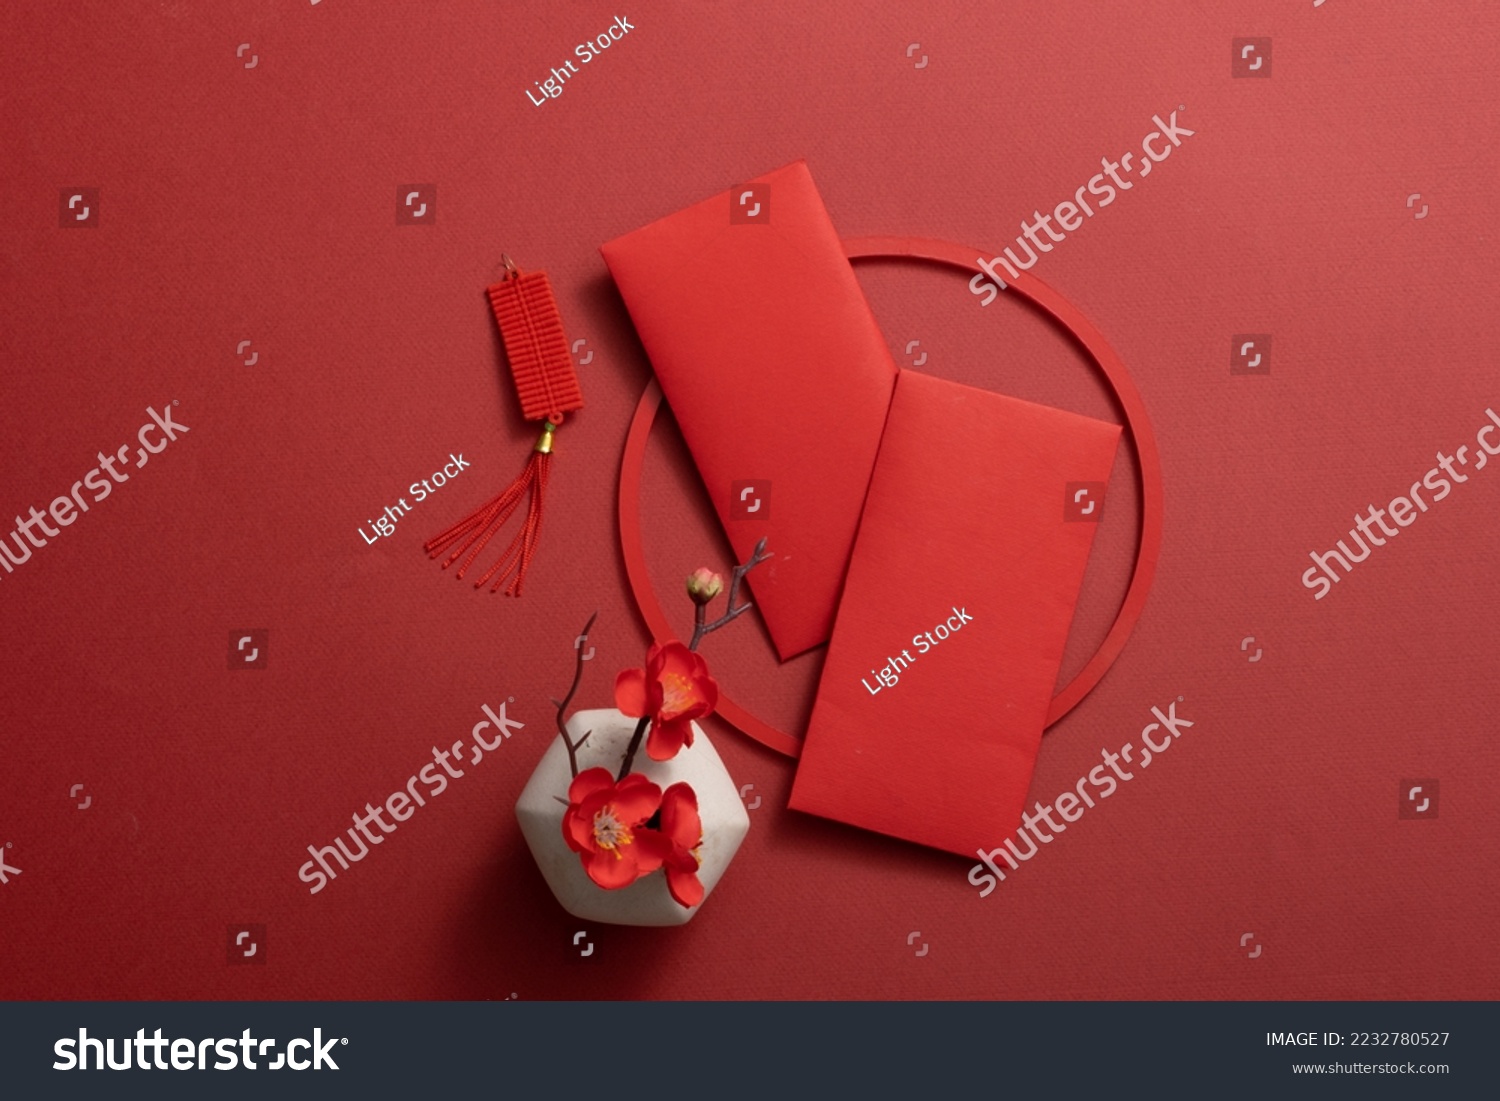 Top view of lucky envelopes and decorative items for Chinese lunar new year on red background. Space for text #2232780527